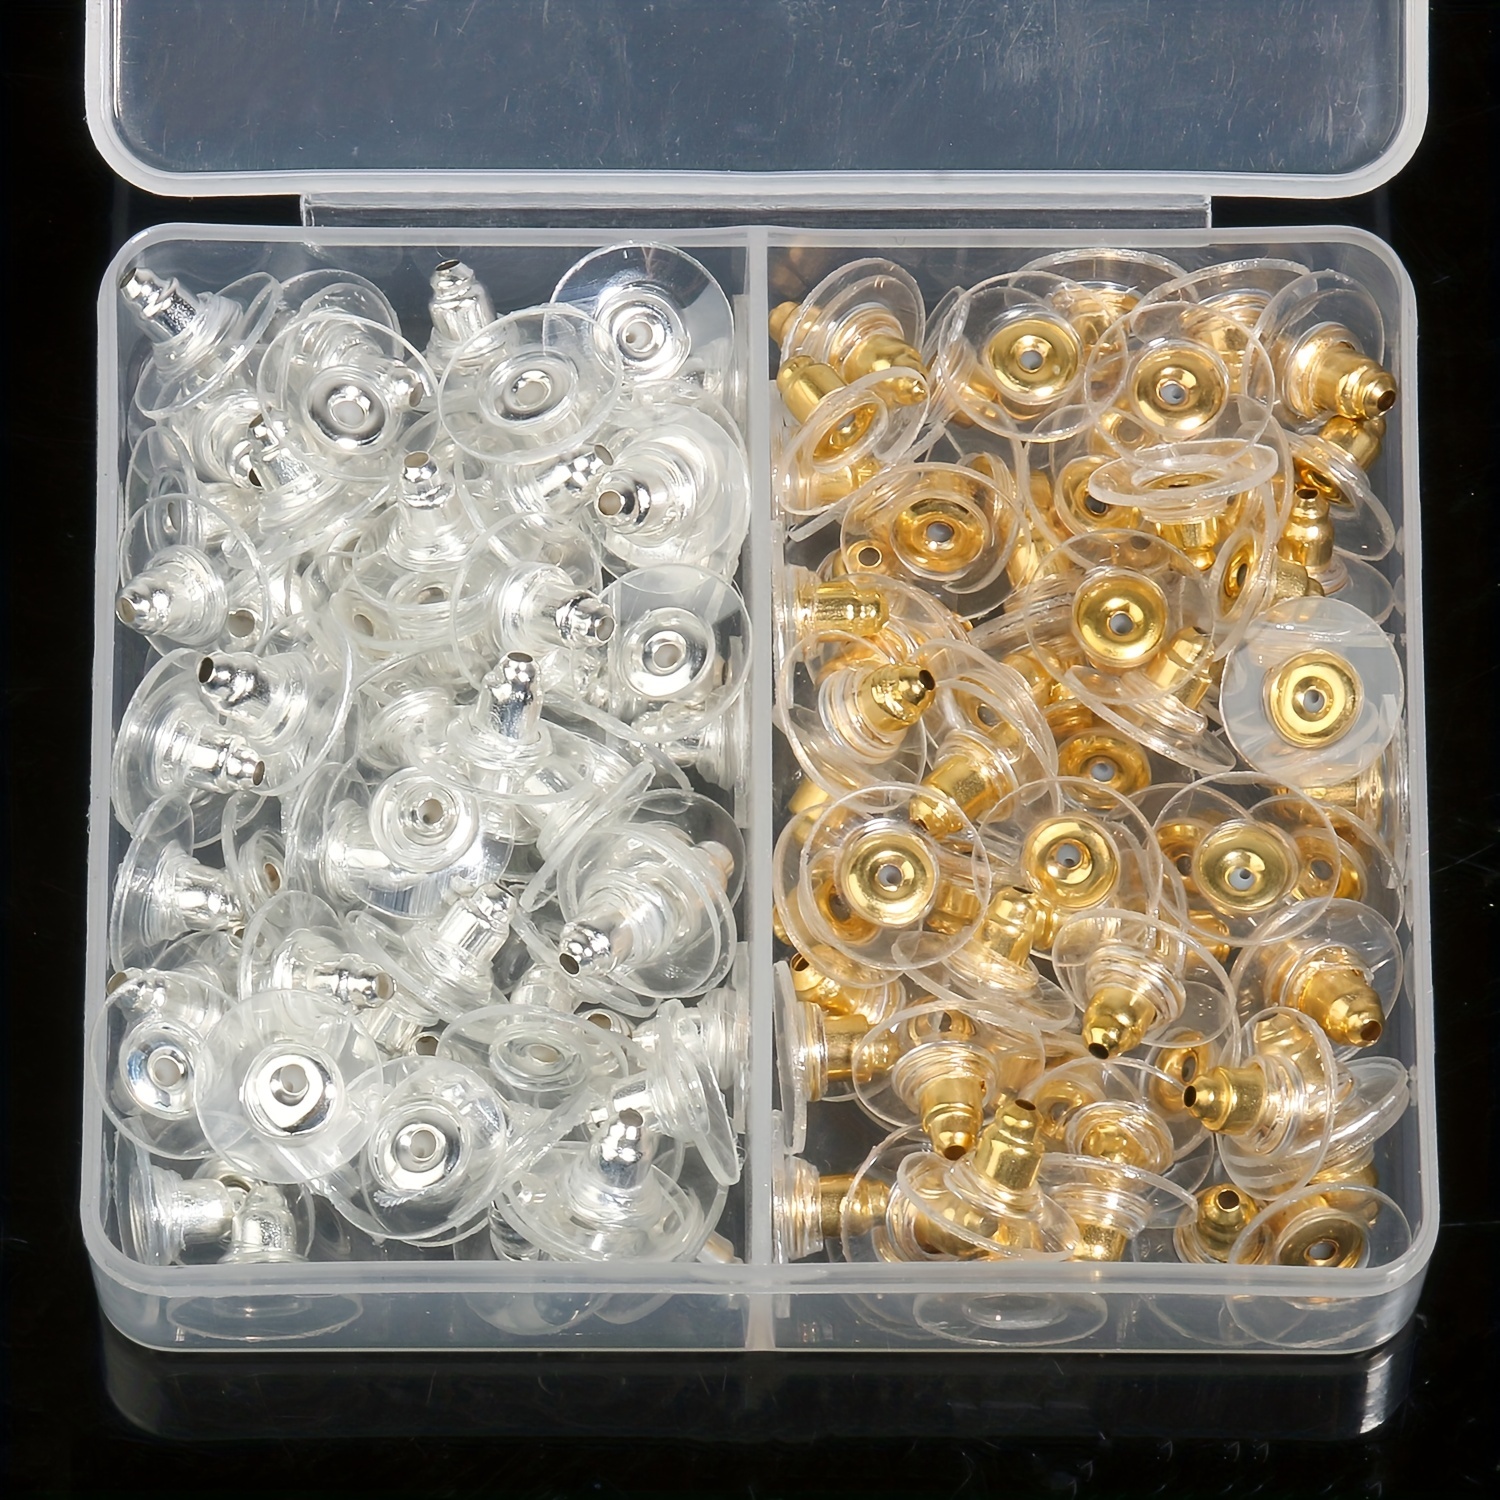 

100pcs Earrings Back Stoppers Jewelry Tool Set Golden Silvery Color Mixed Flying Saucer Shape Ear Clog Ear Stud Plug Earrings Back Diy Jewelry Accessories